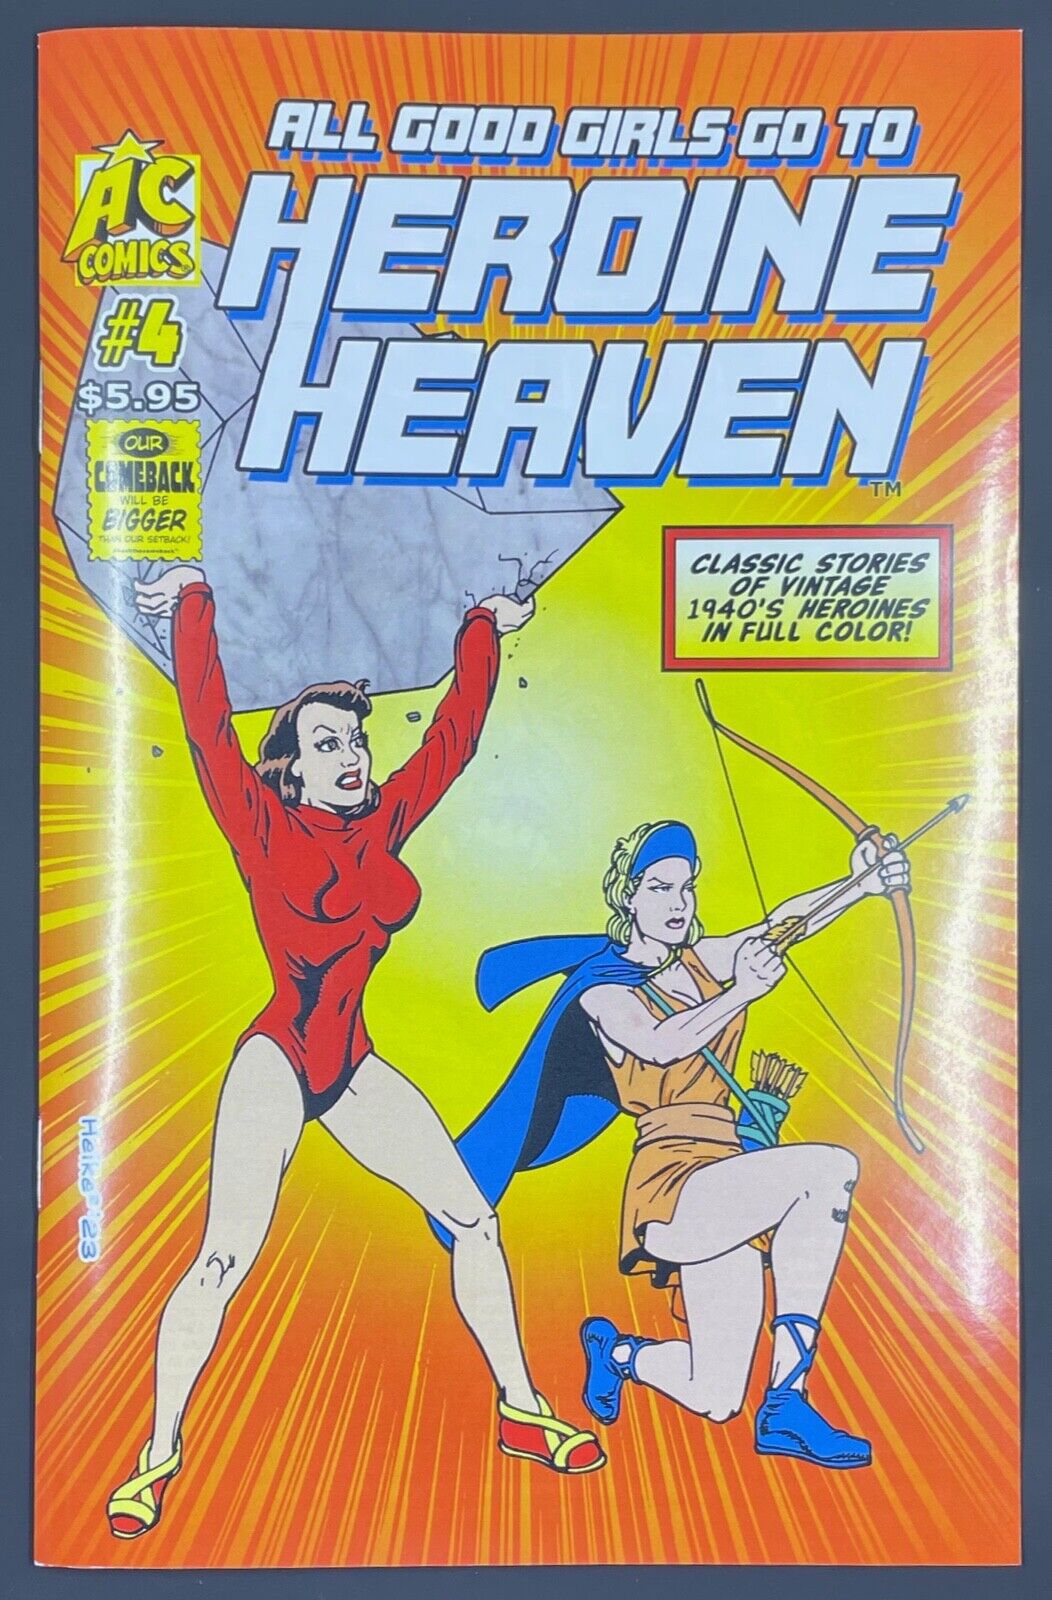 Heroine Heaven #4 NEW NM AC Comics Golden Age ready to ship